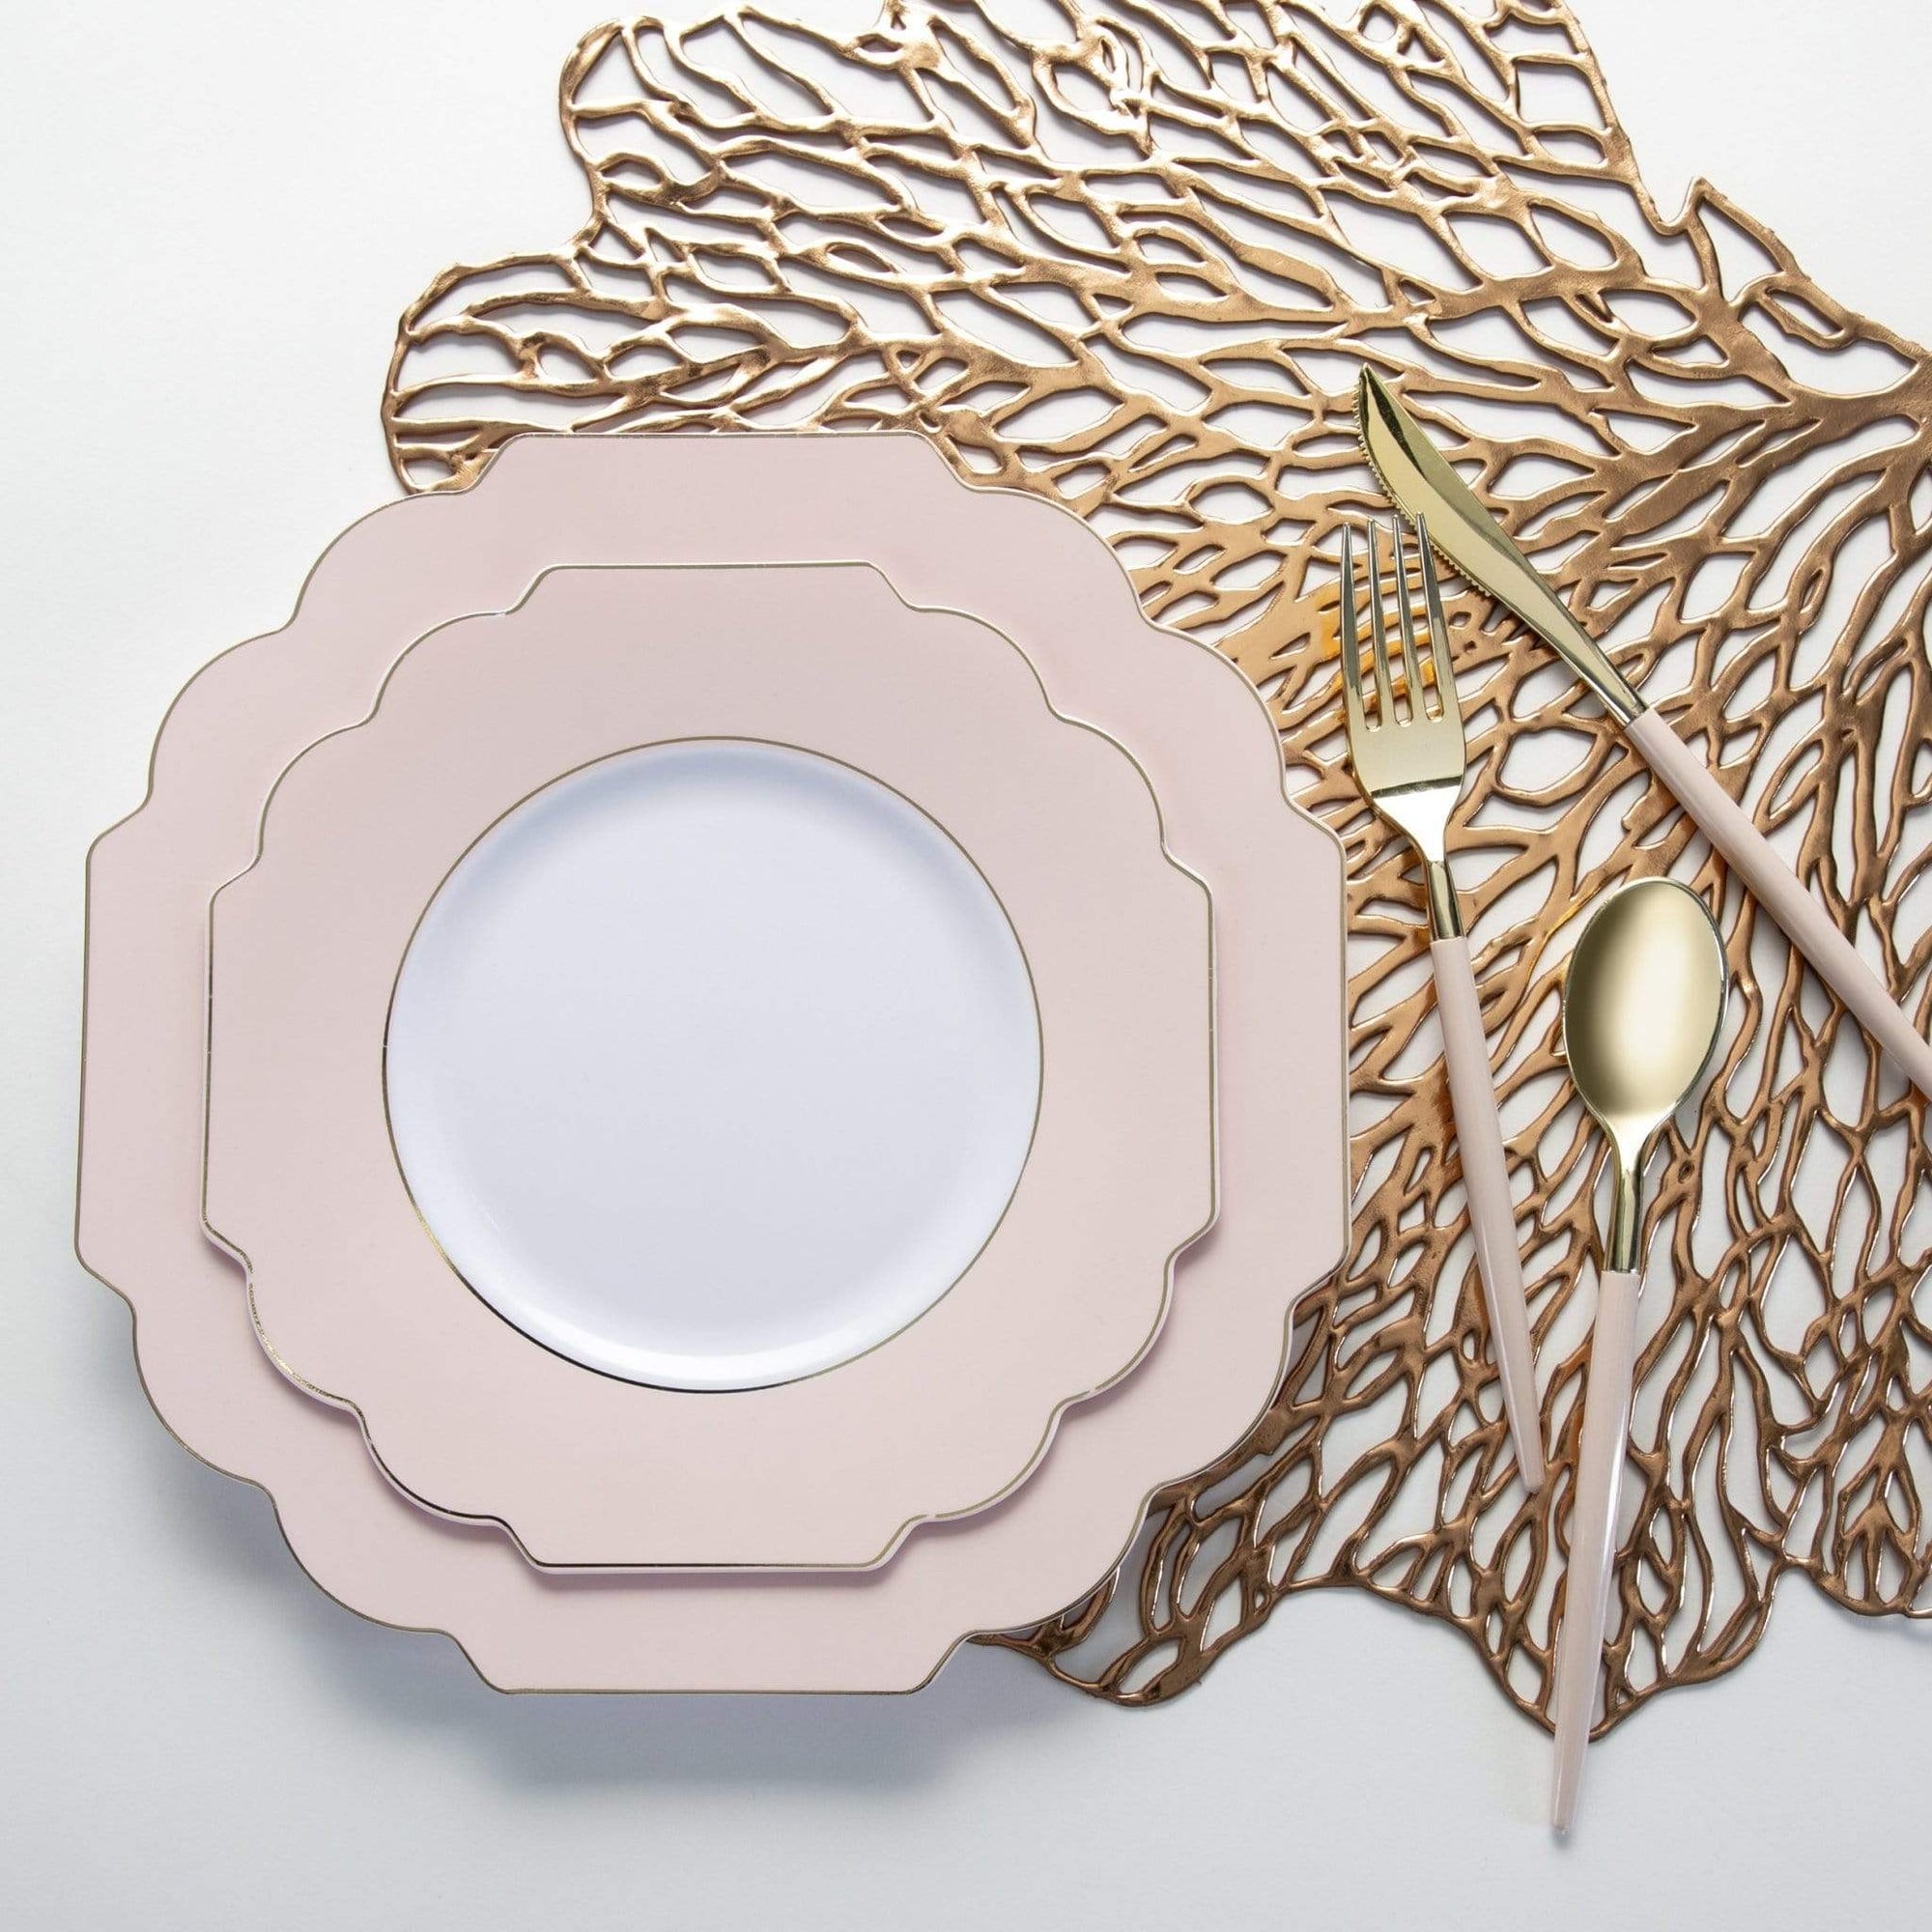 Blush Pink Scalloped Plastic Dinner Plates 10ct | The Party Darling